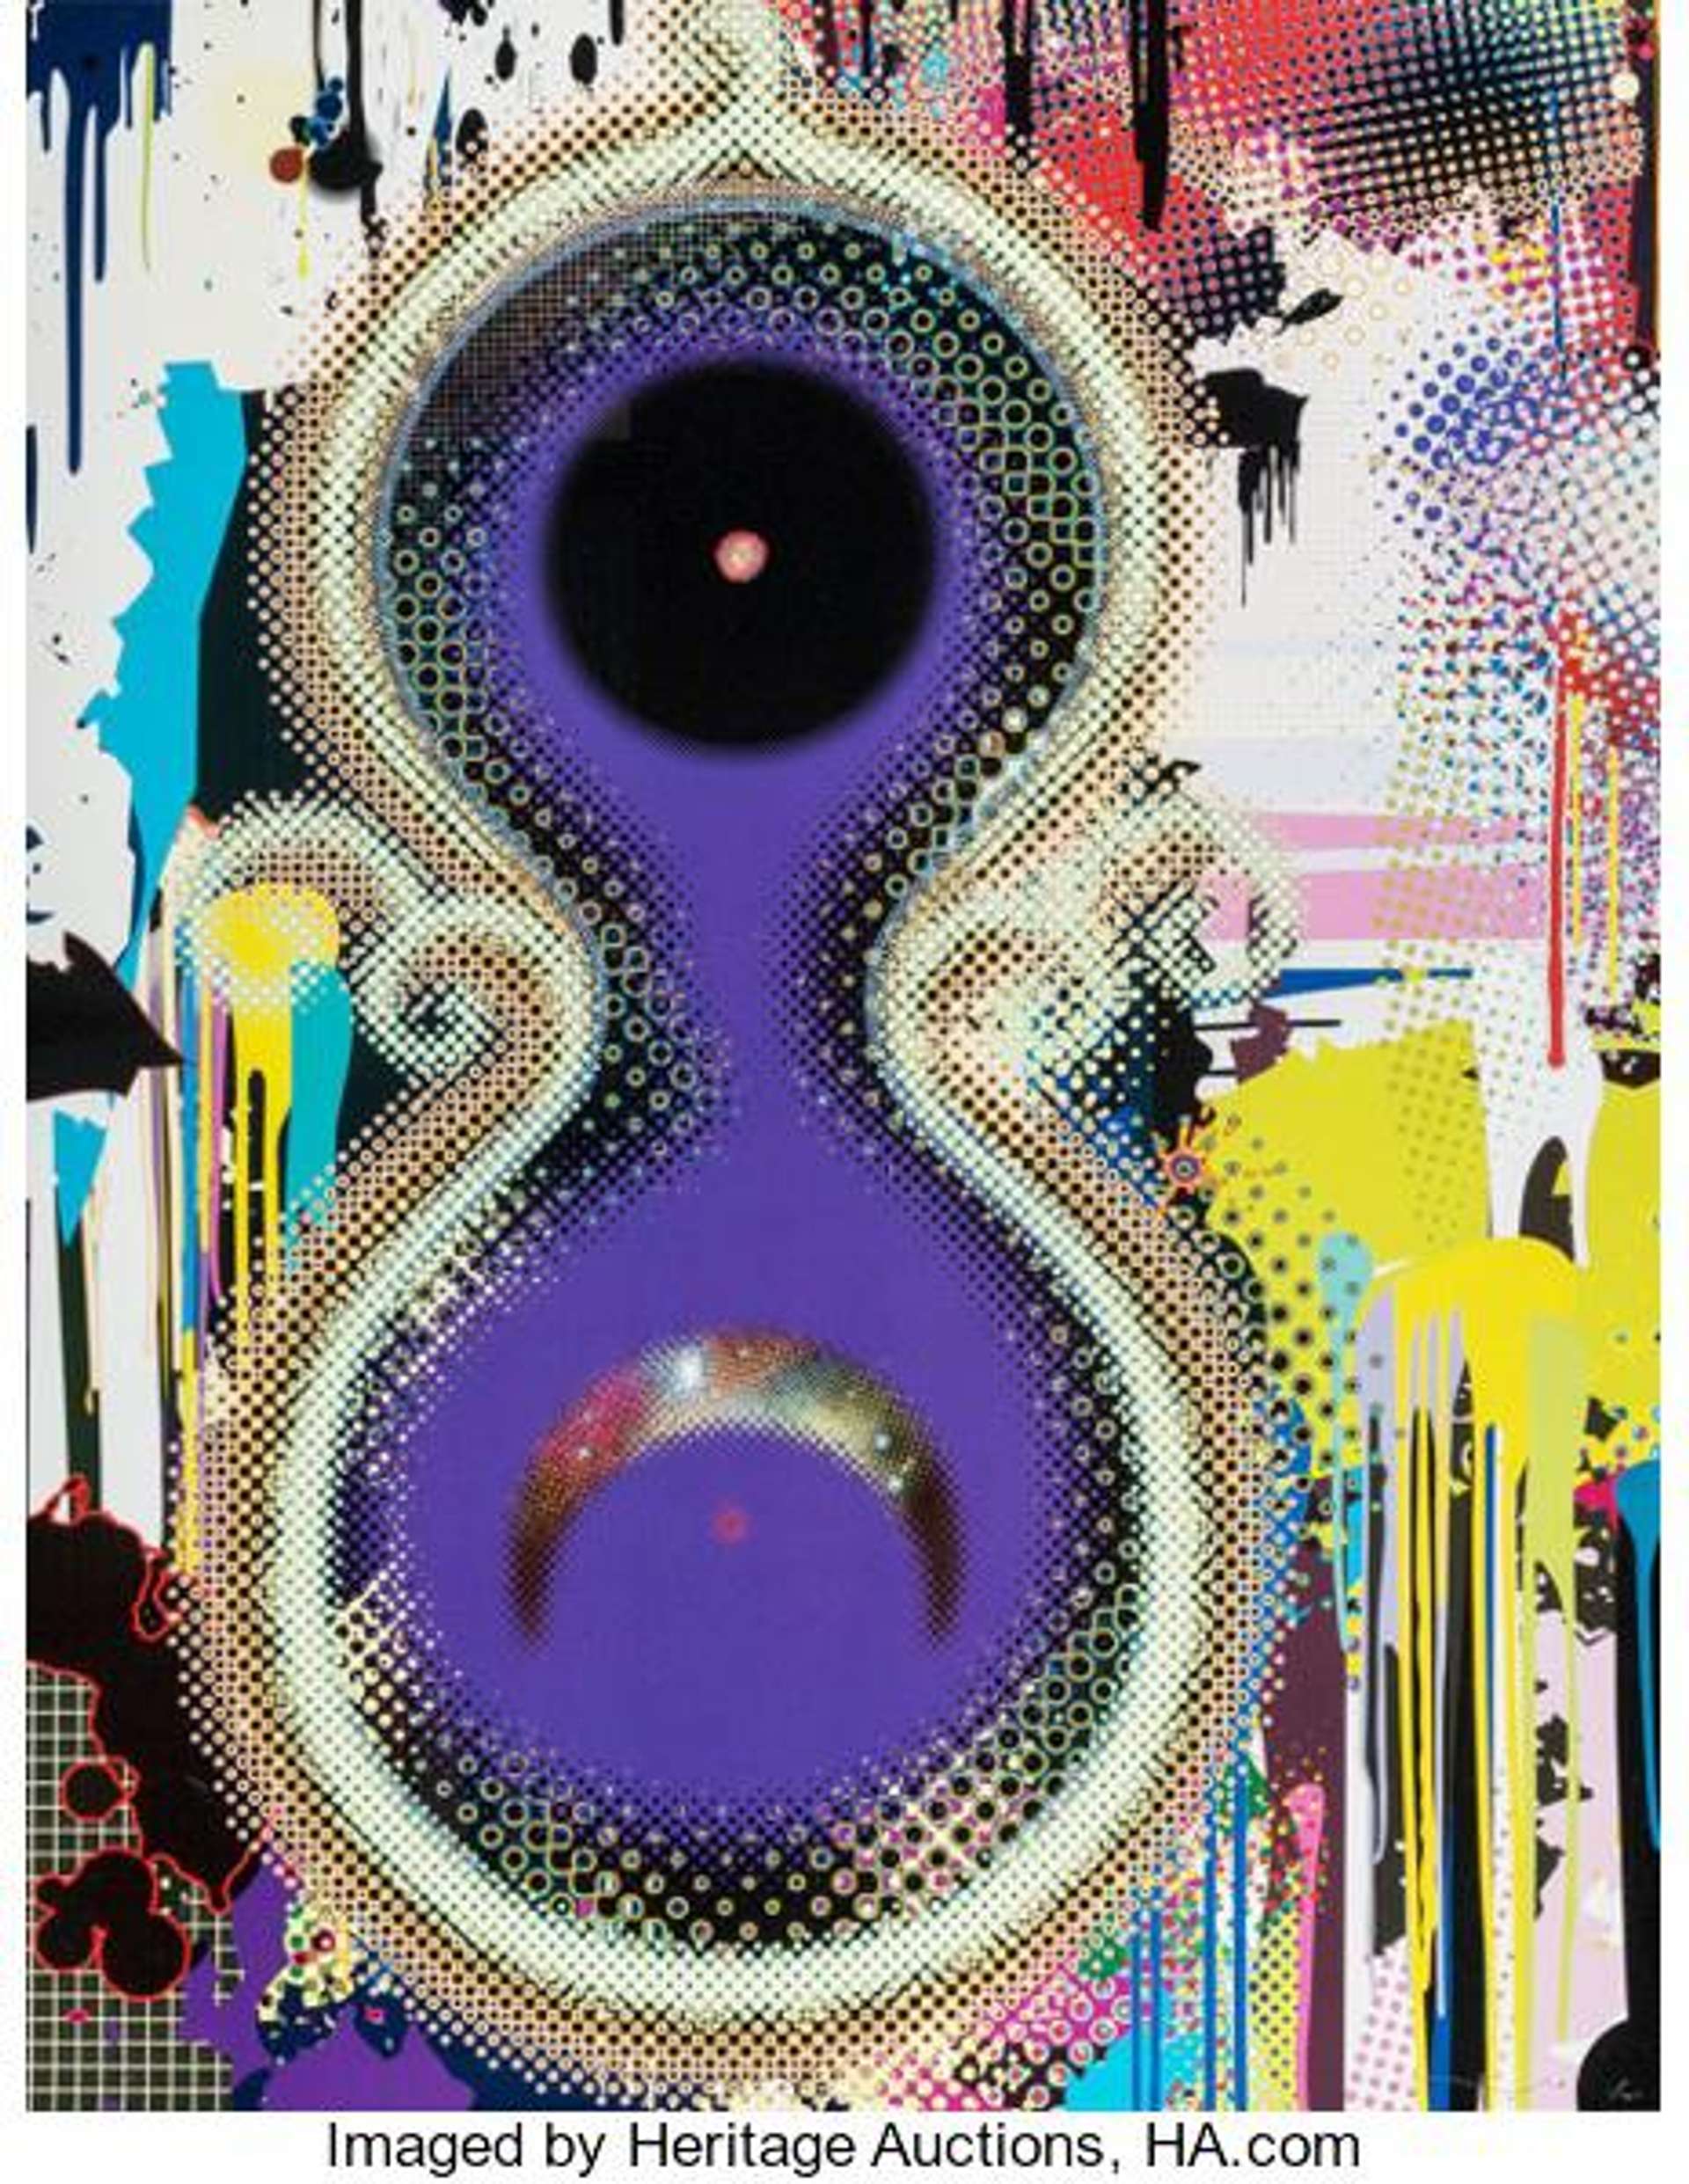 Takashi Murakami ‘s Genome No 10. Purple graffiti style figure in front of multi-coloured background in the style of Japanese Pop Art